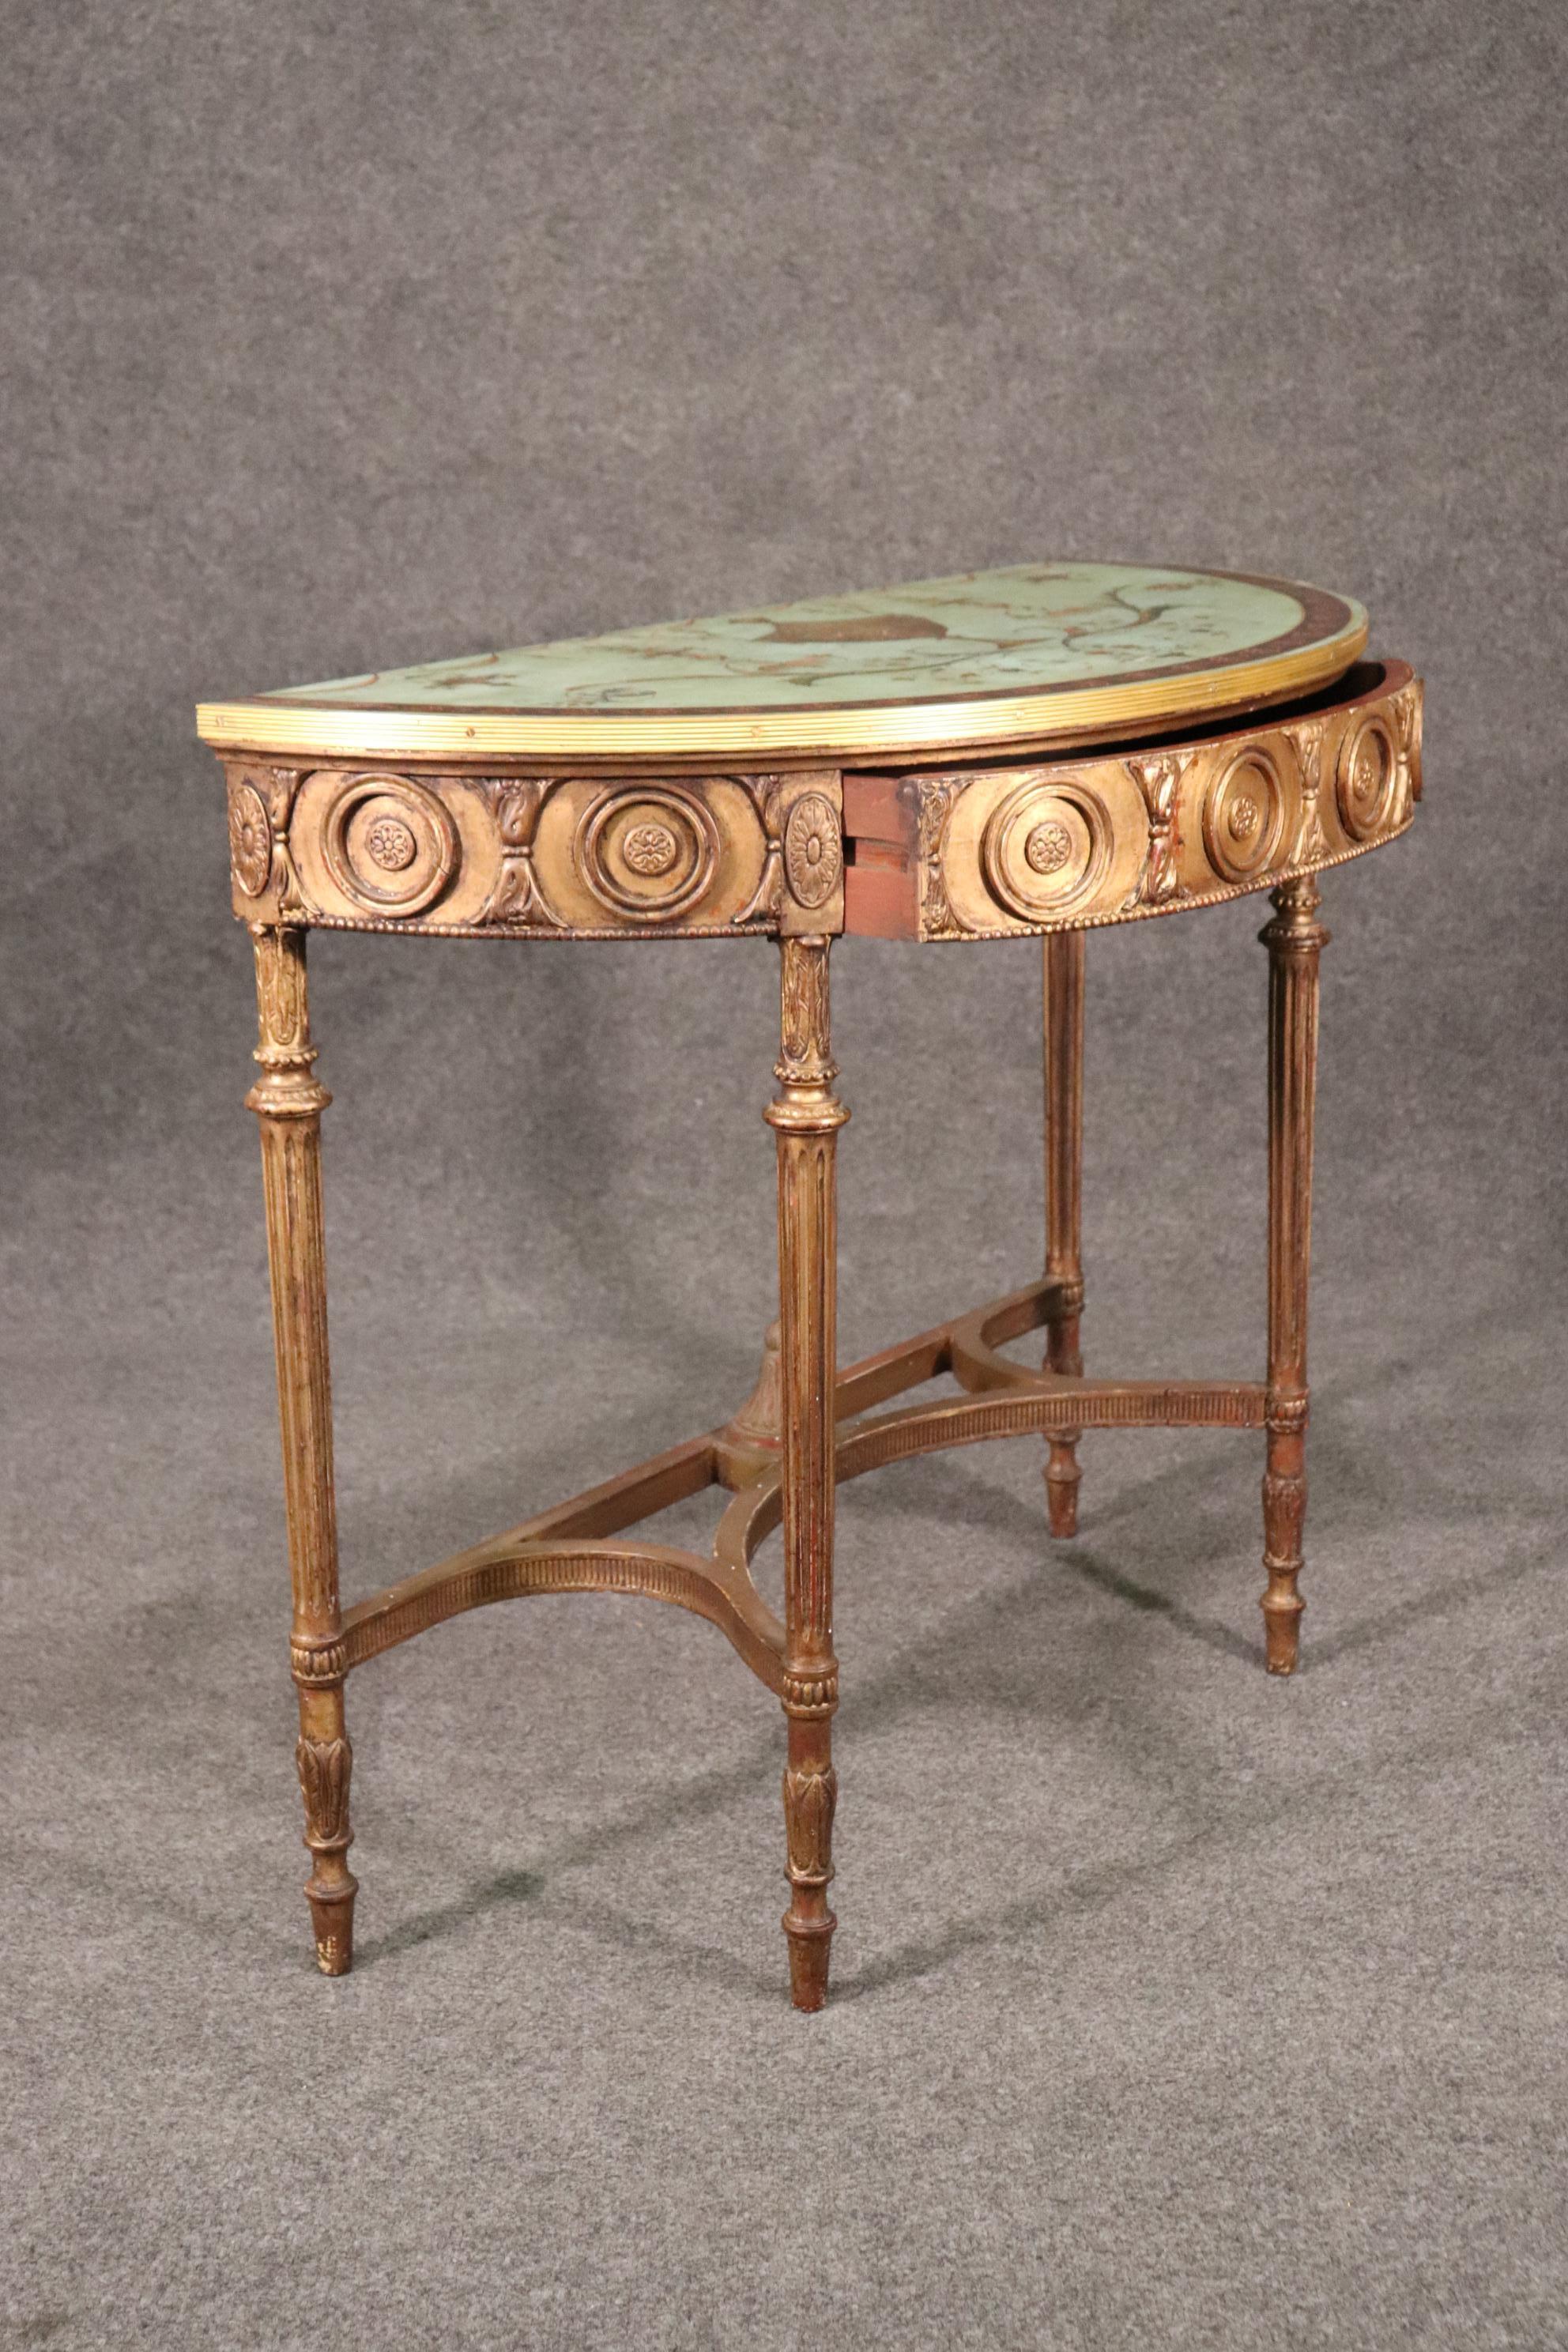 Fine Quality Paint Decorated Gilded Adams Demilune Console Table, Circa 1890 In Good Condition For Sale In Swedesboro, NJ